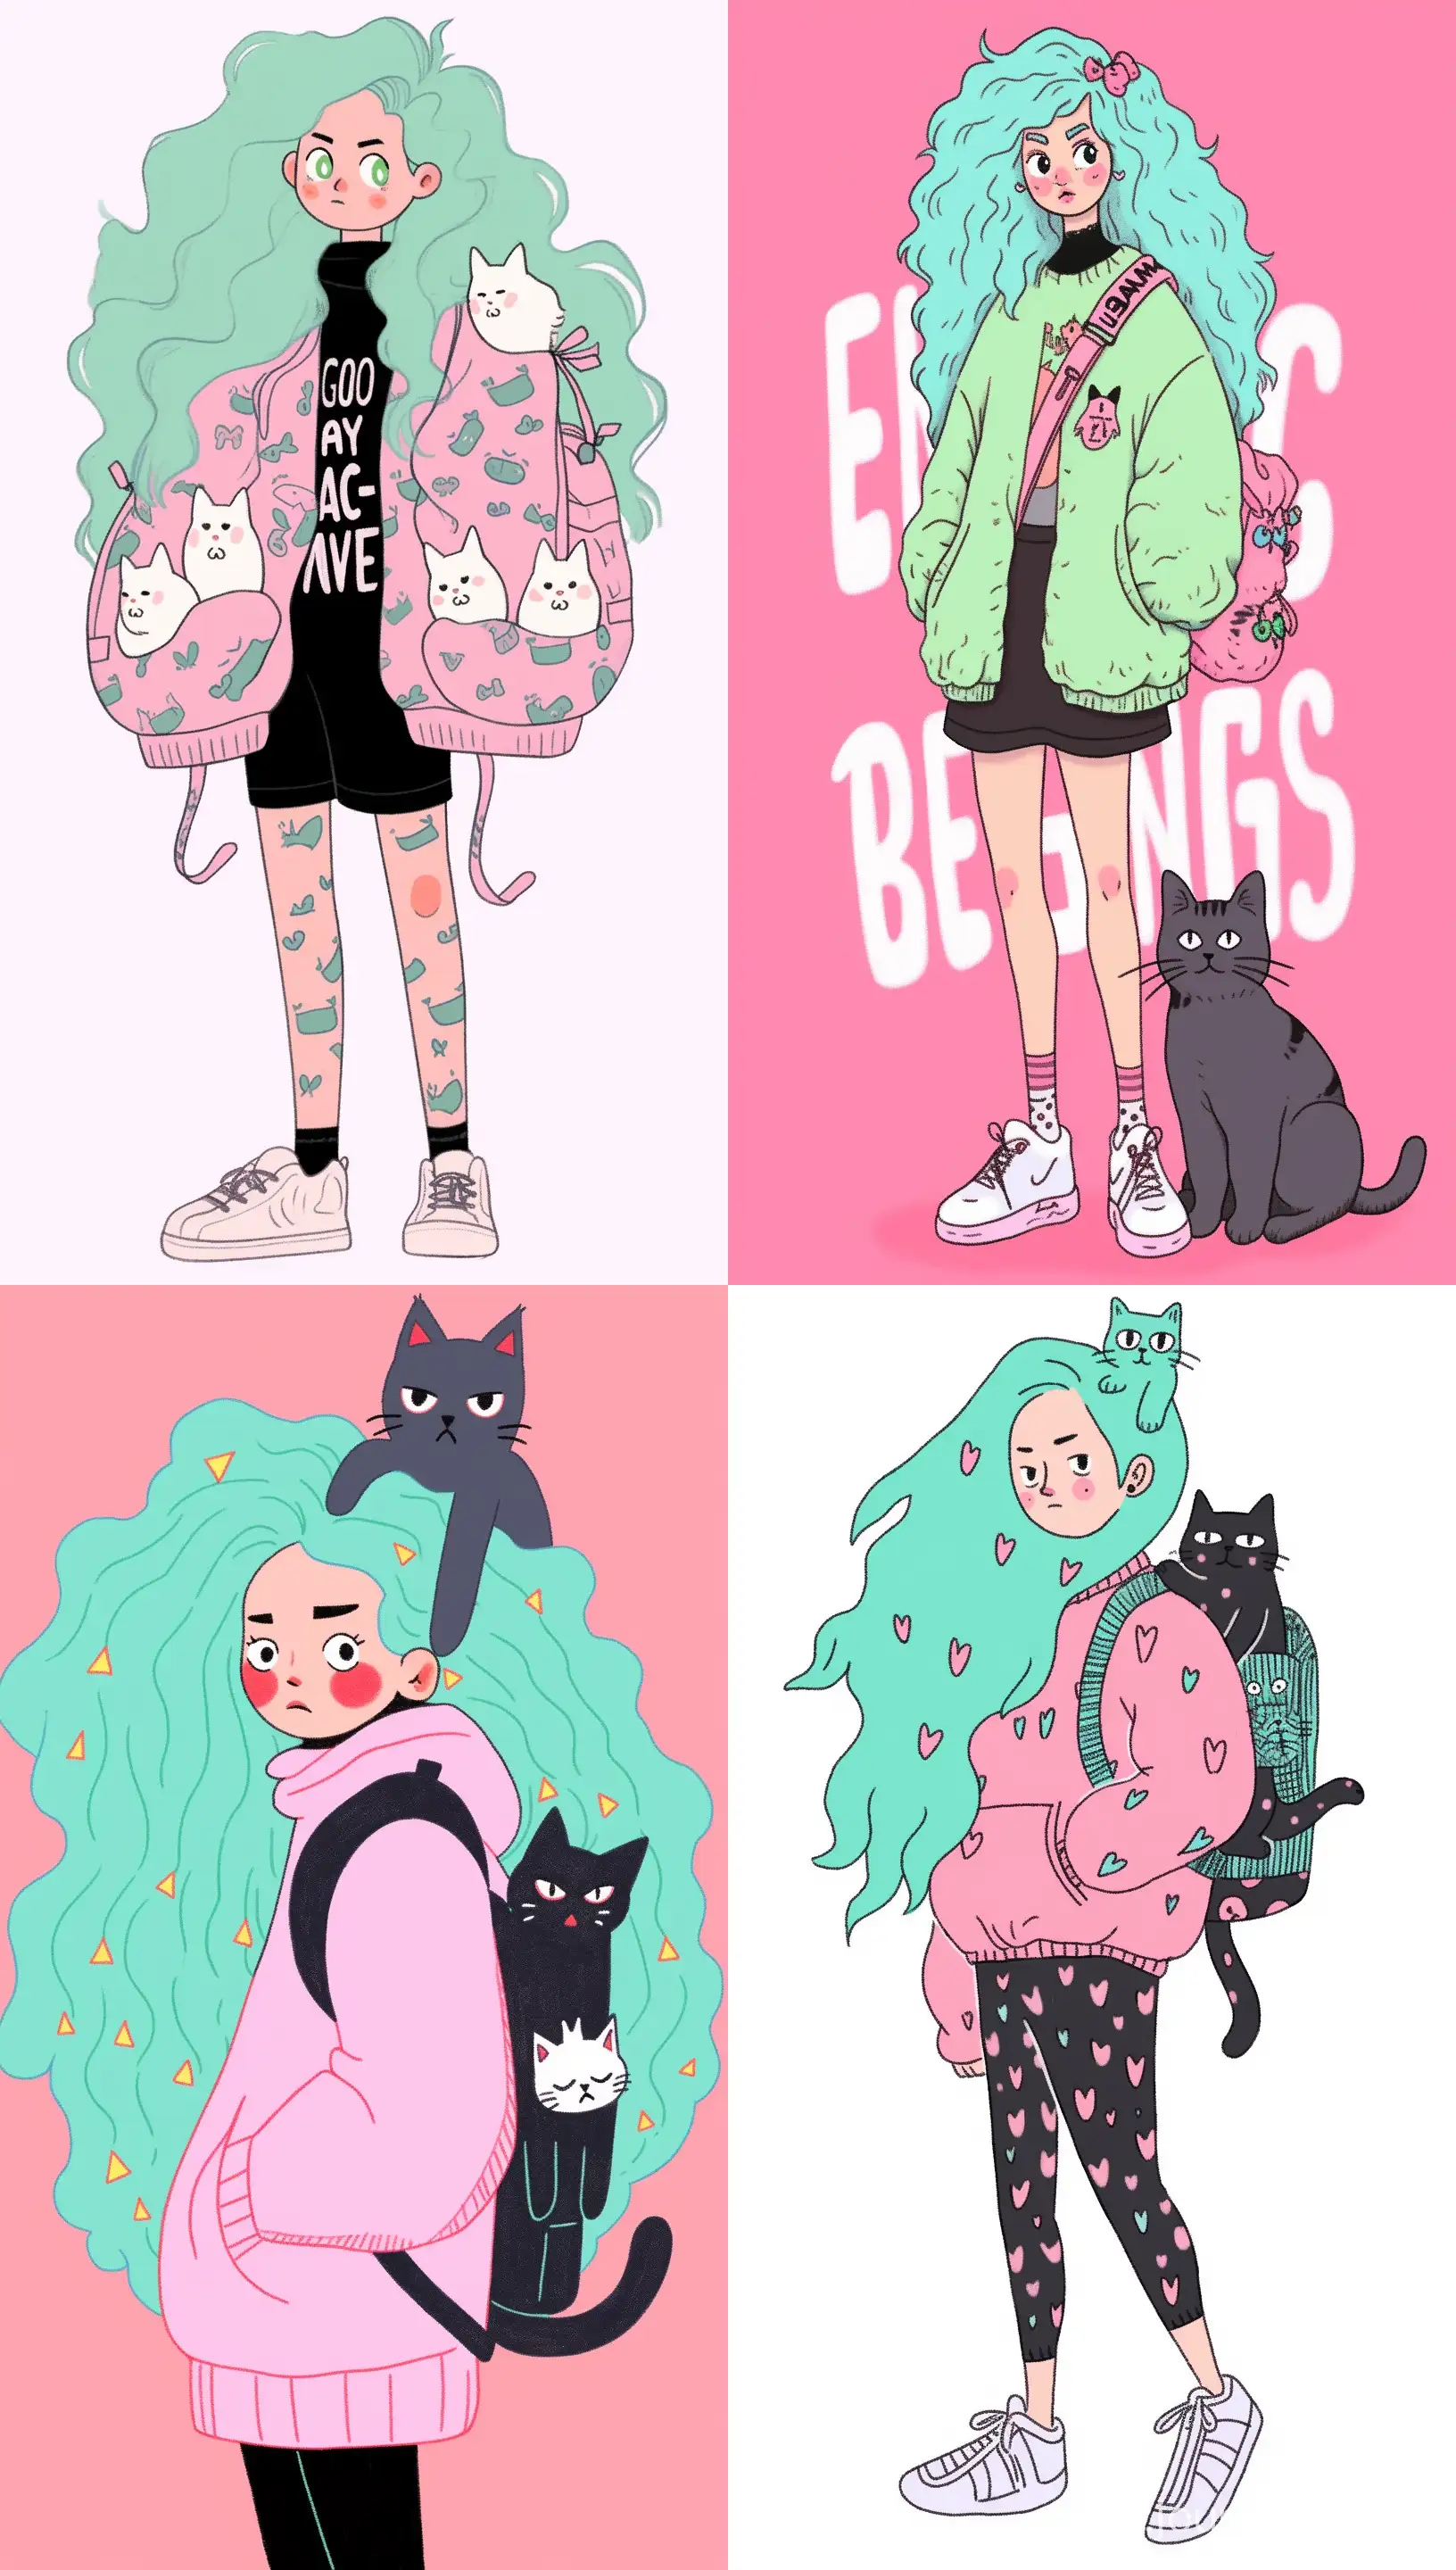 Quirky-Girl-with-Pink-Hair-and-Cat-Cyberpunk-Style-Illustration